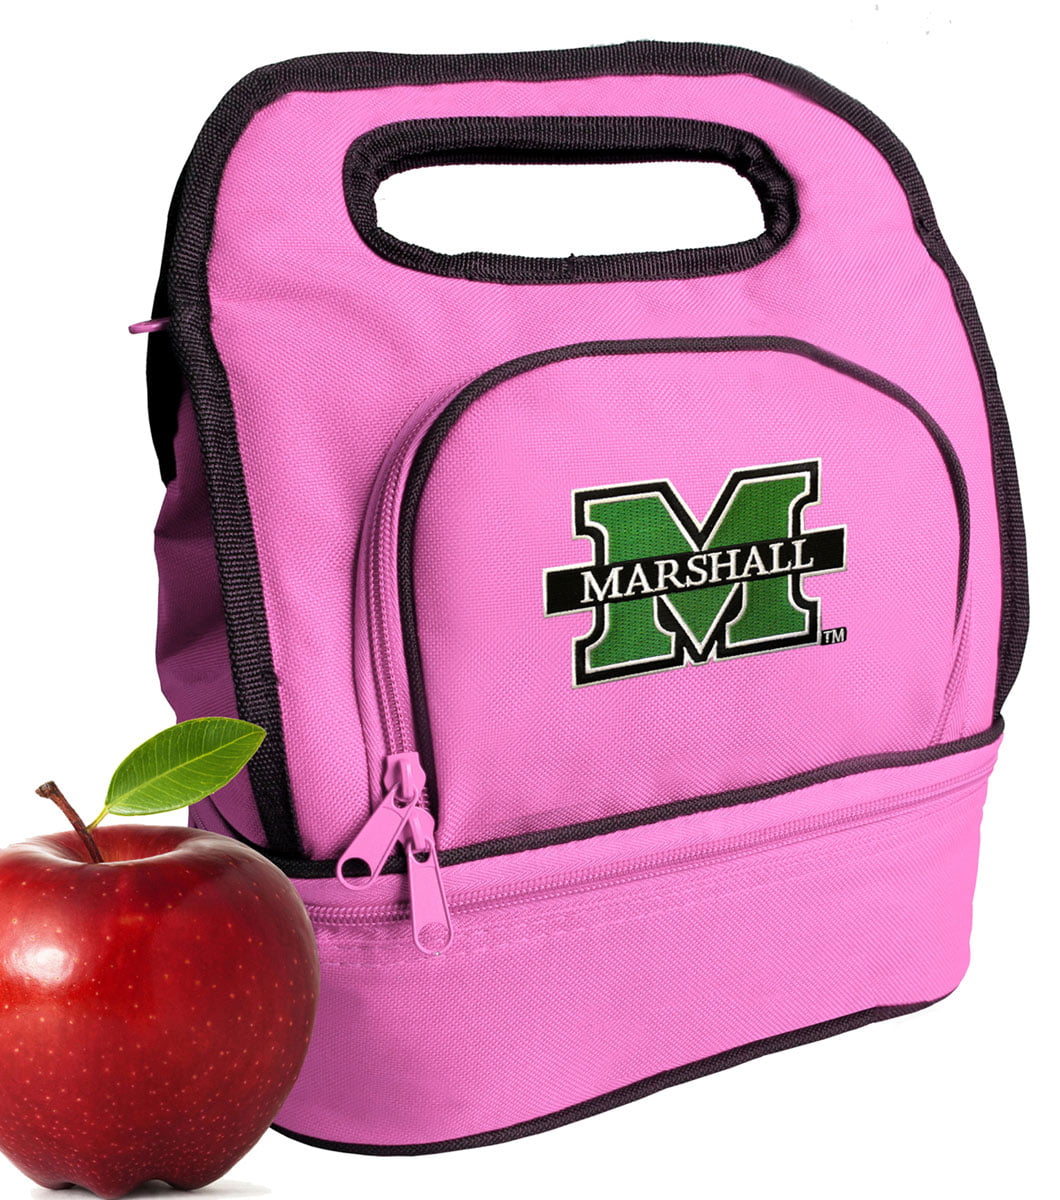 Broad Bay Marshall University Lunch Bag Official NCAA Marshall Lunchboxes 